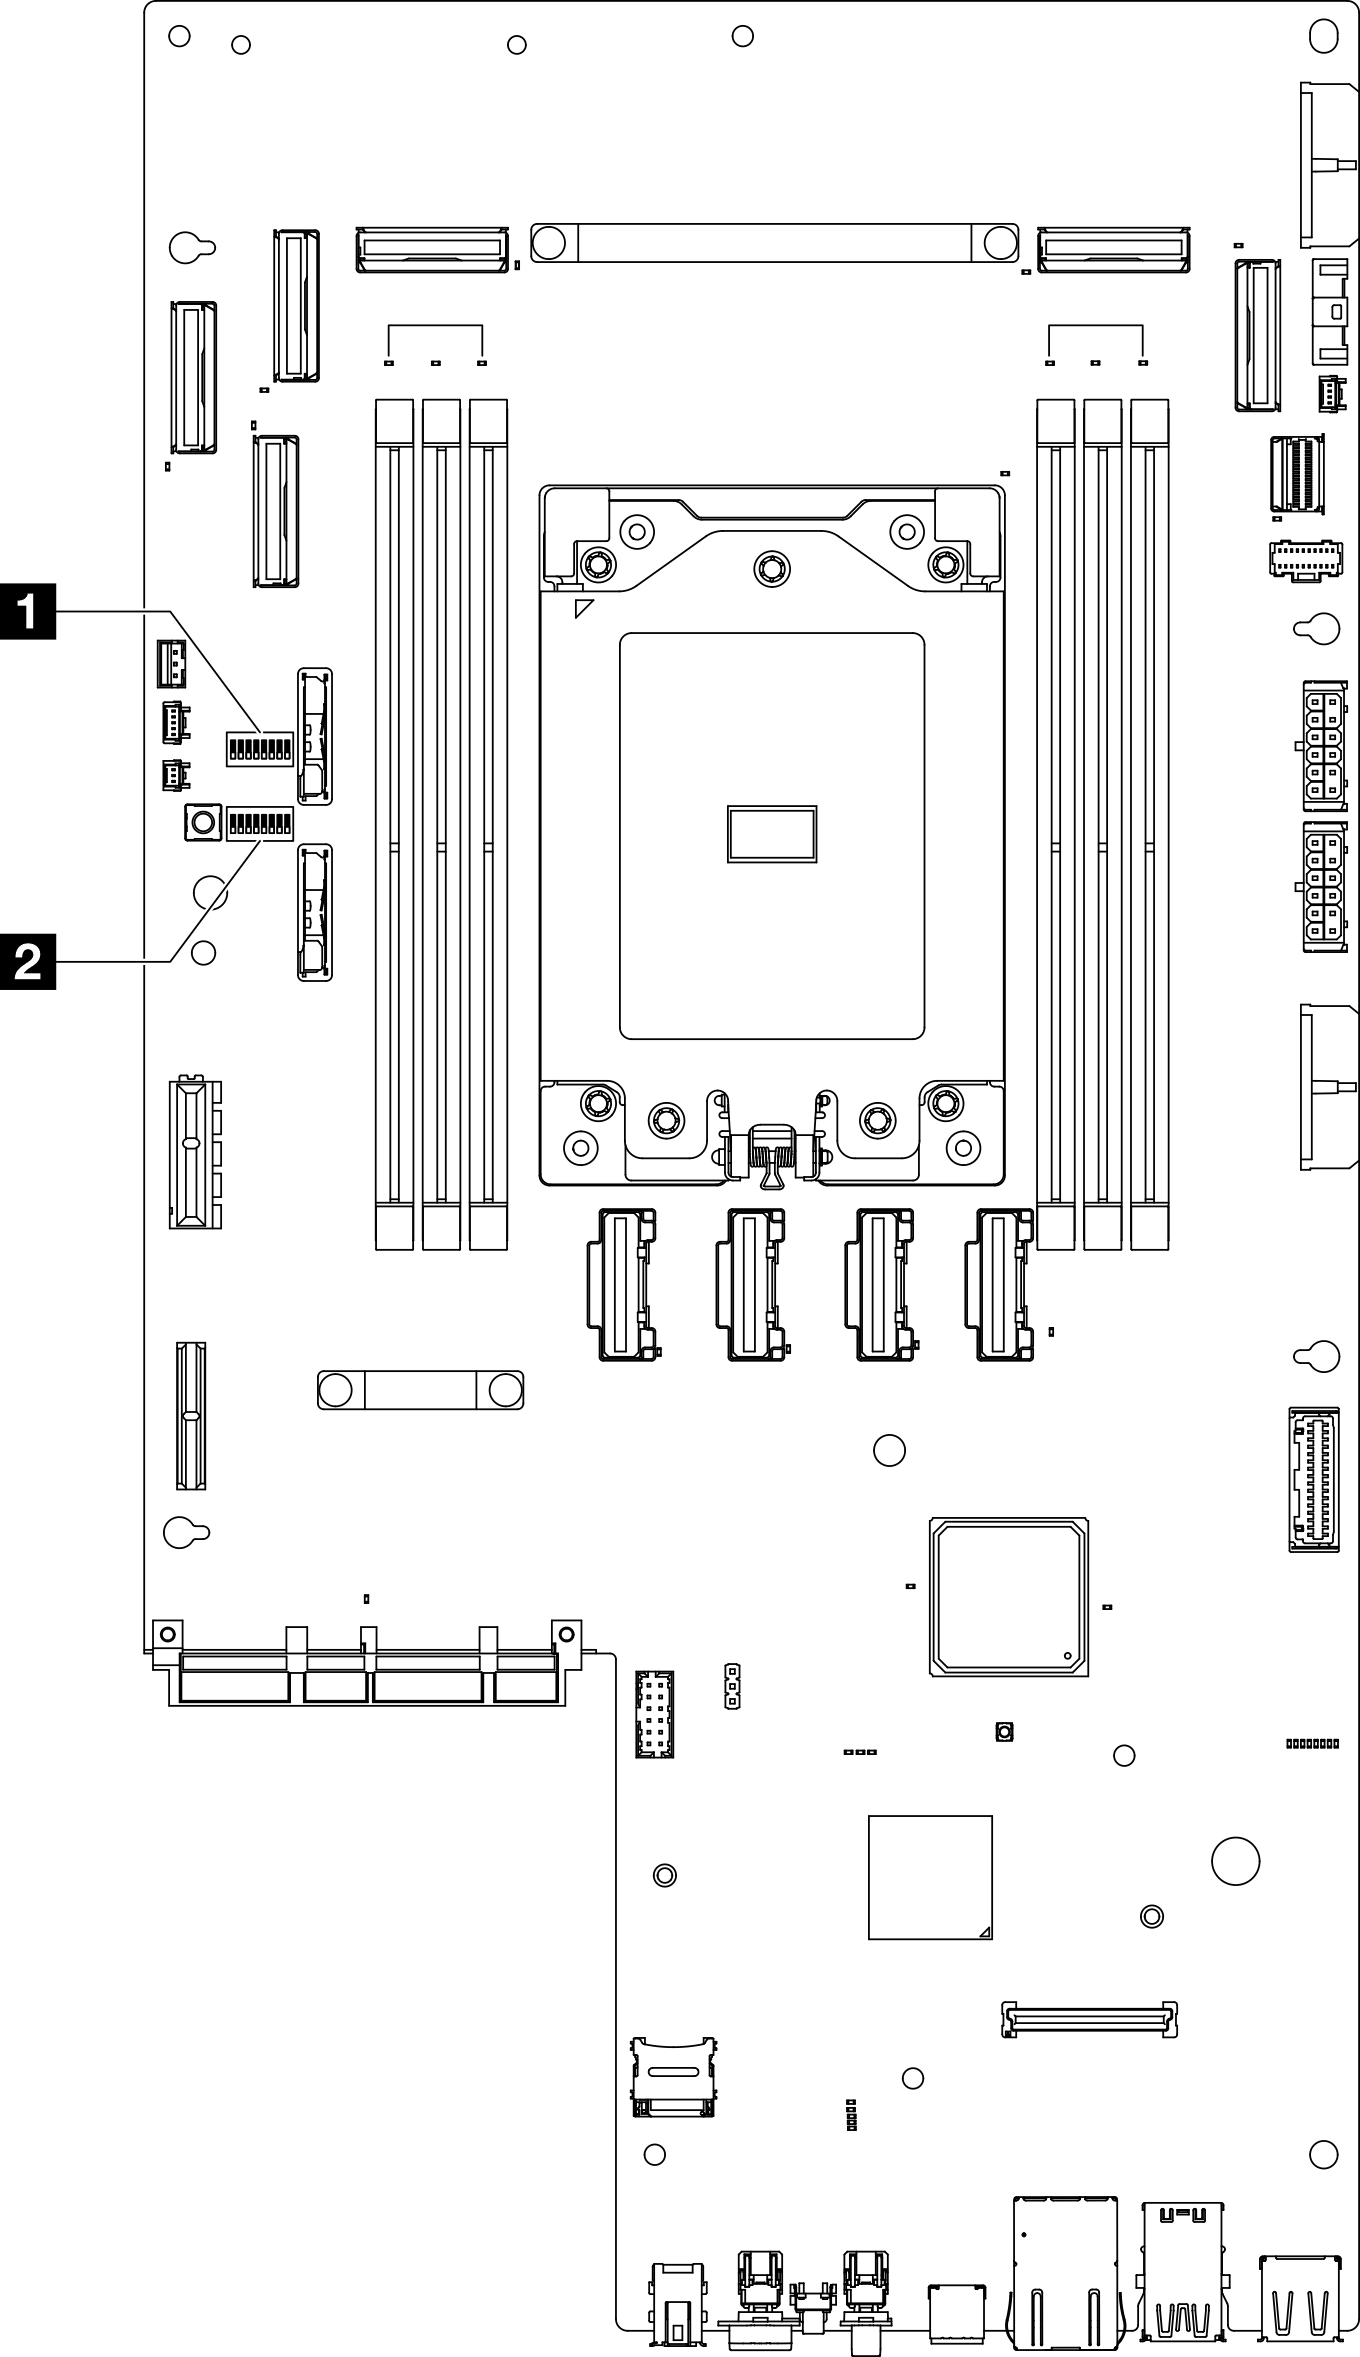 System-board switches